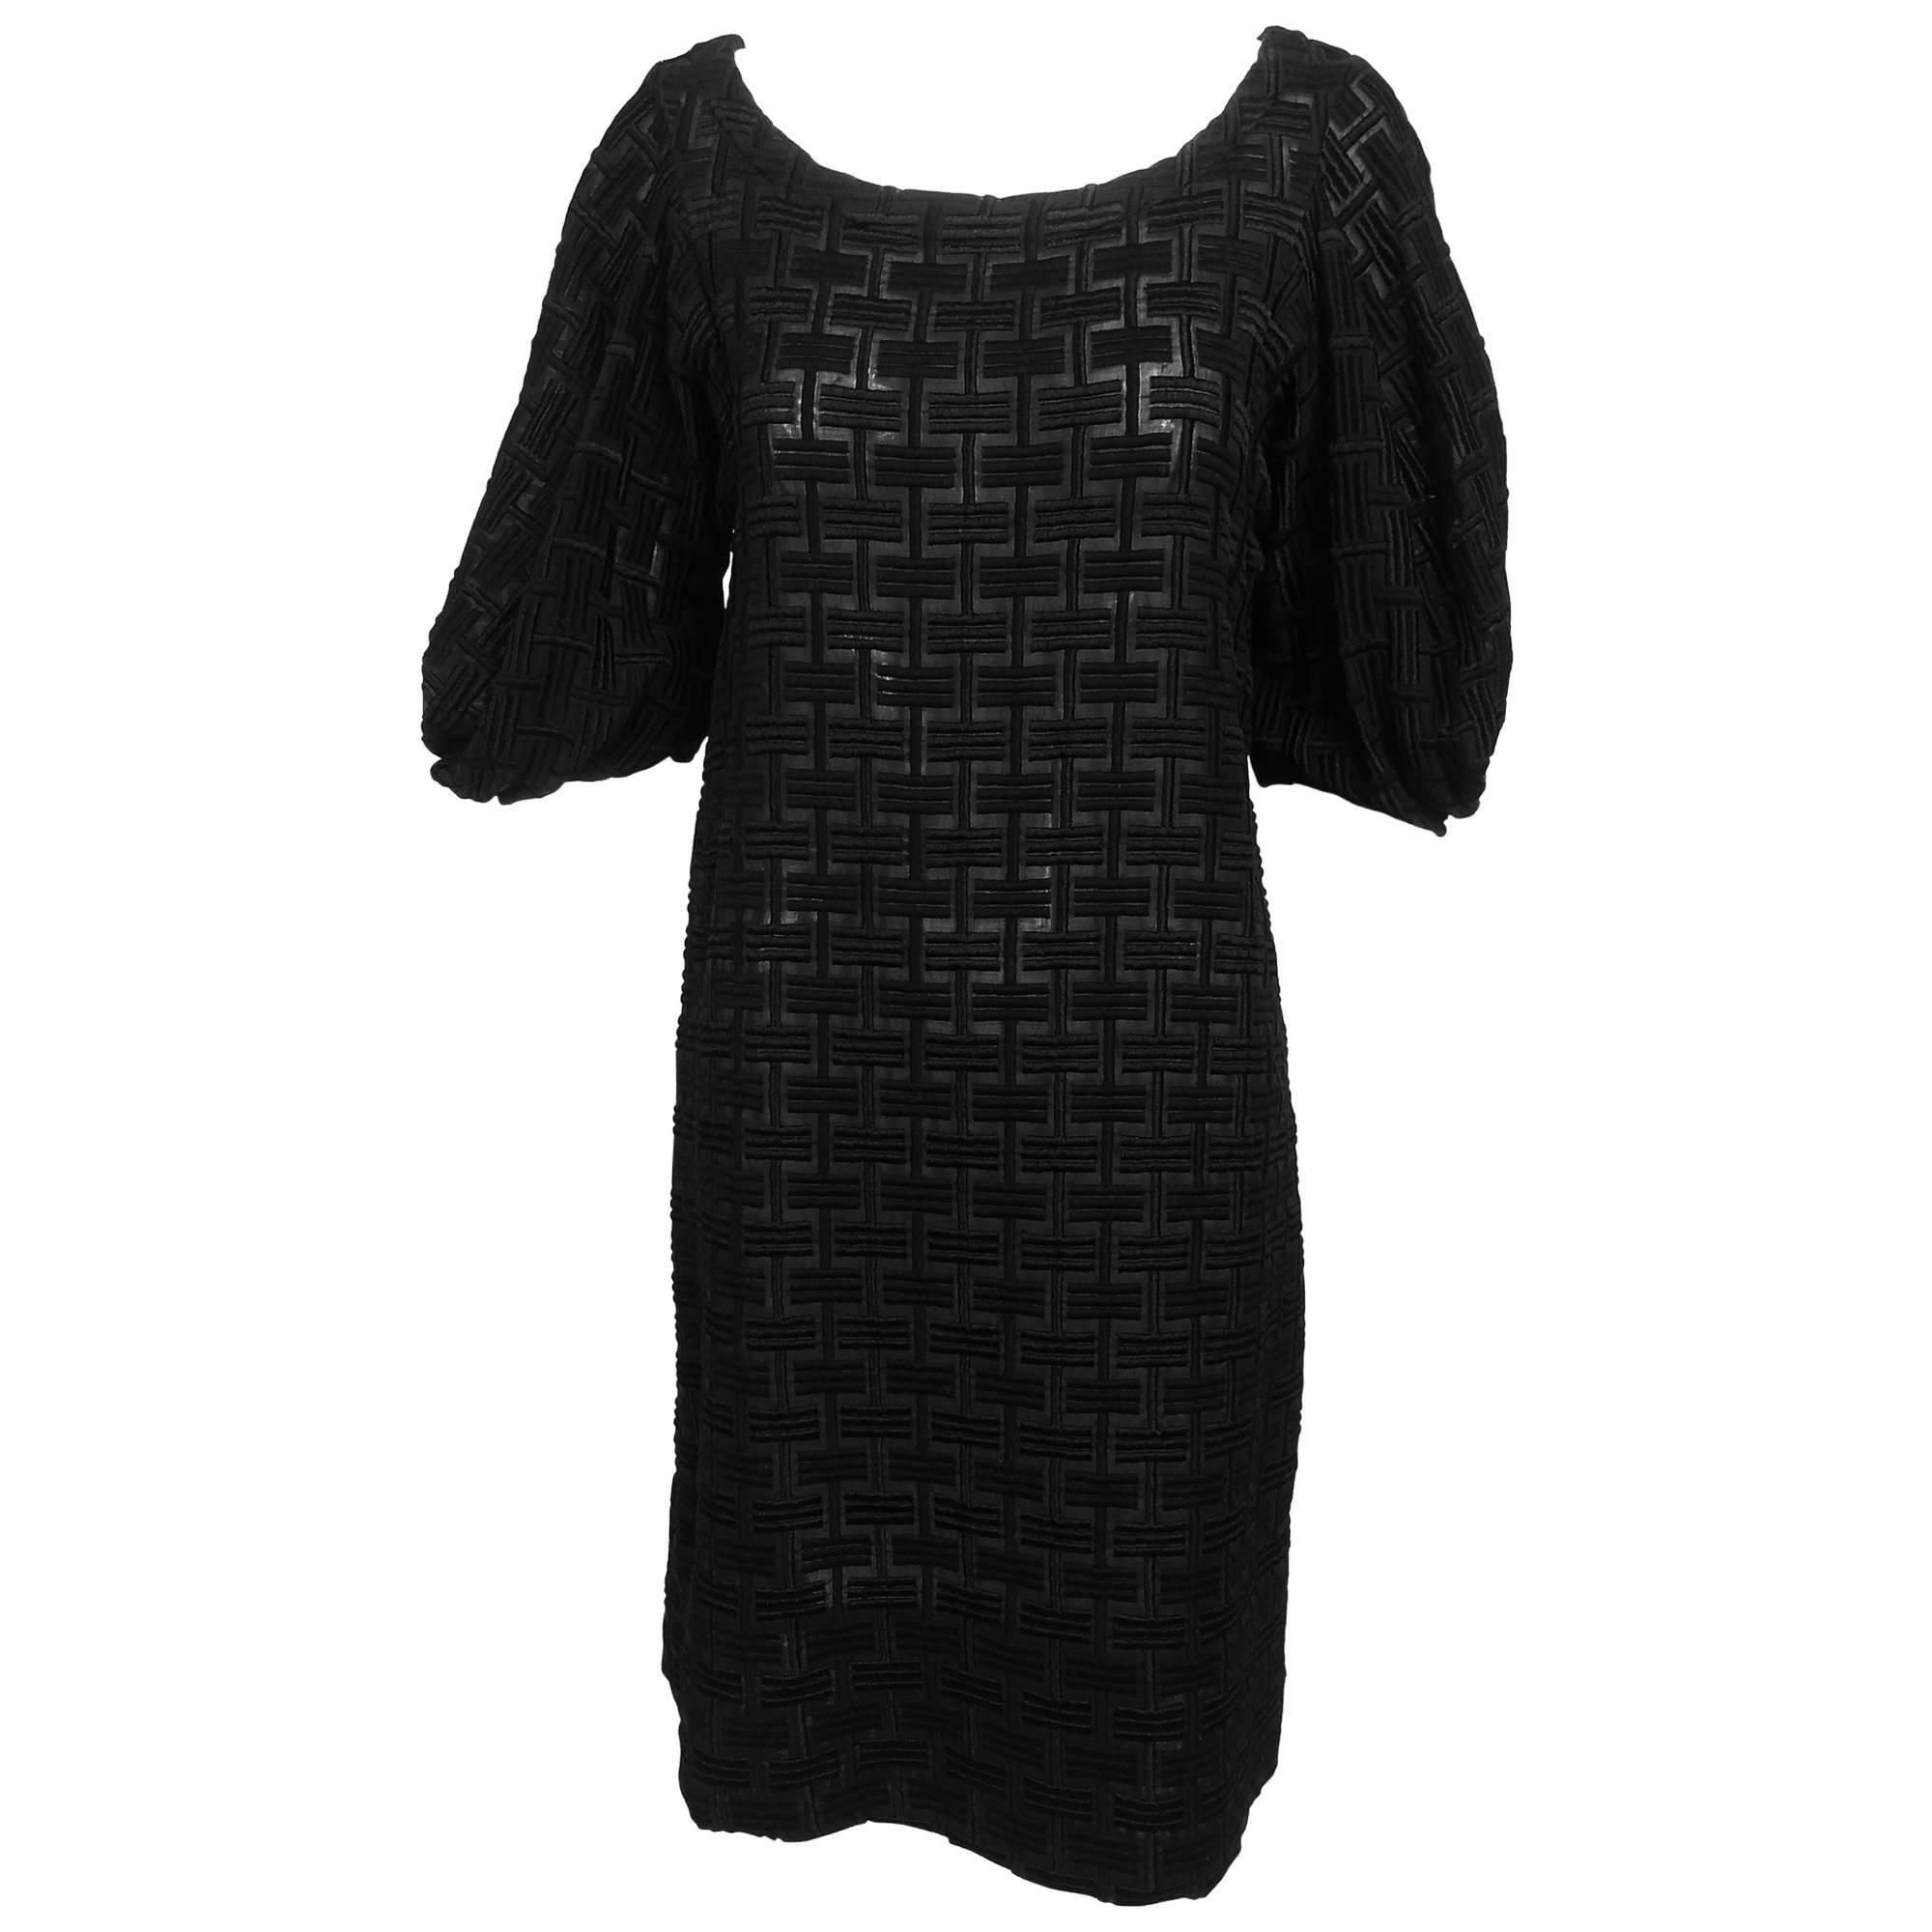 Marni heavily embroidered sheer black cotton day dress